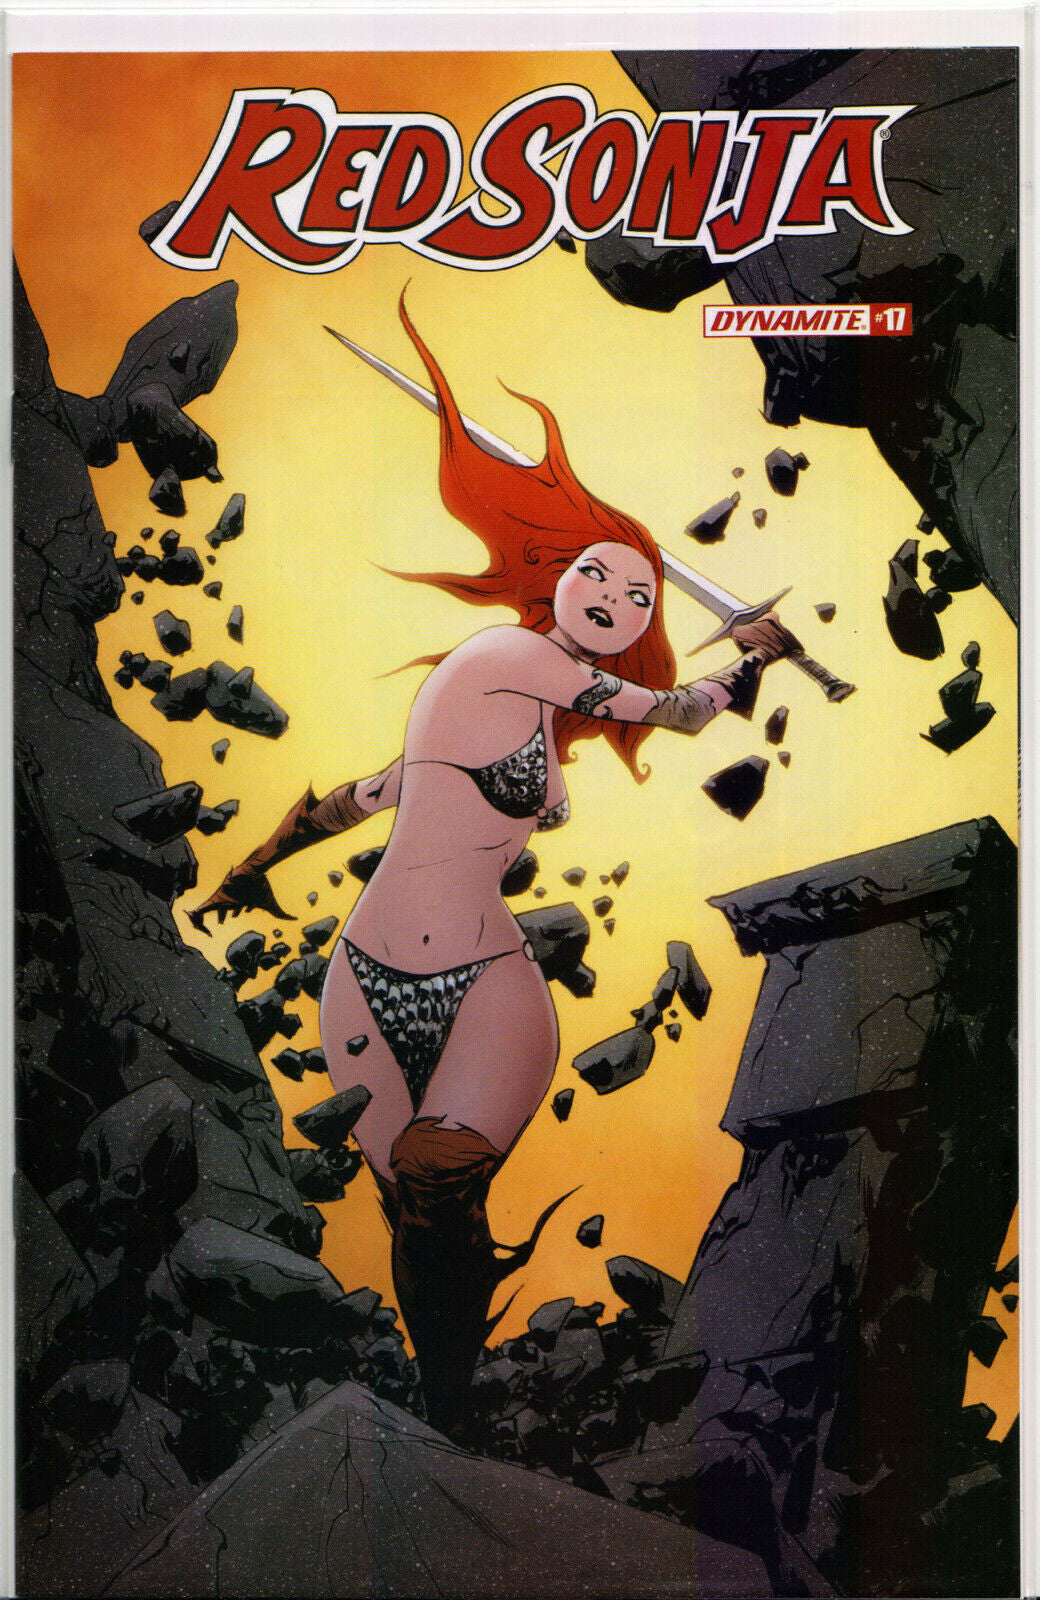 RED SONJA #17 (JAE LEE VARIANT COVER) COMIC BOOK ~ Dynamite Entertainment